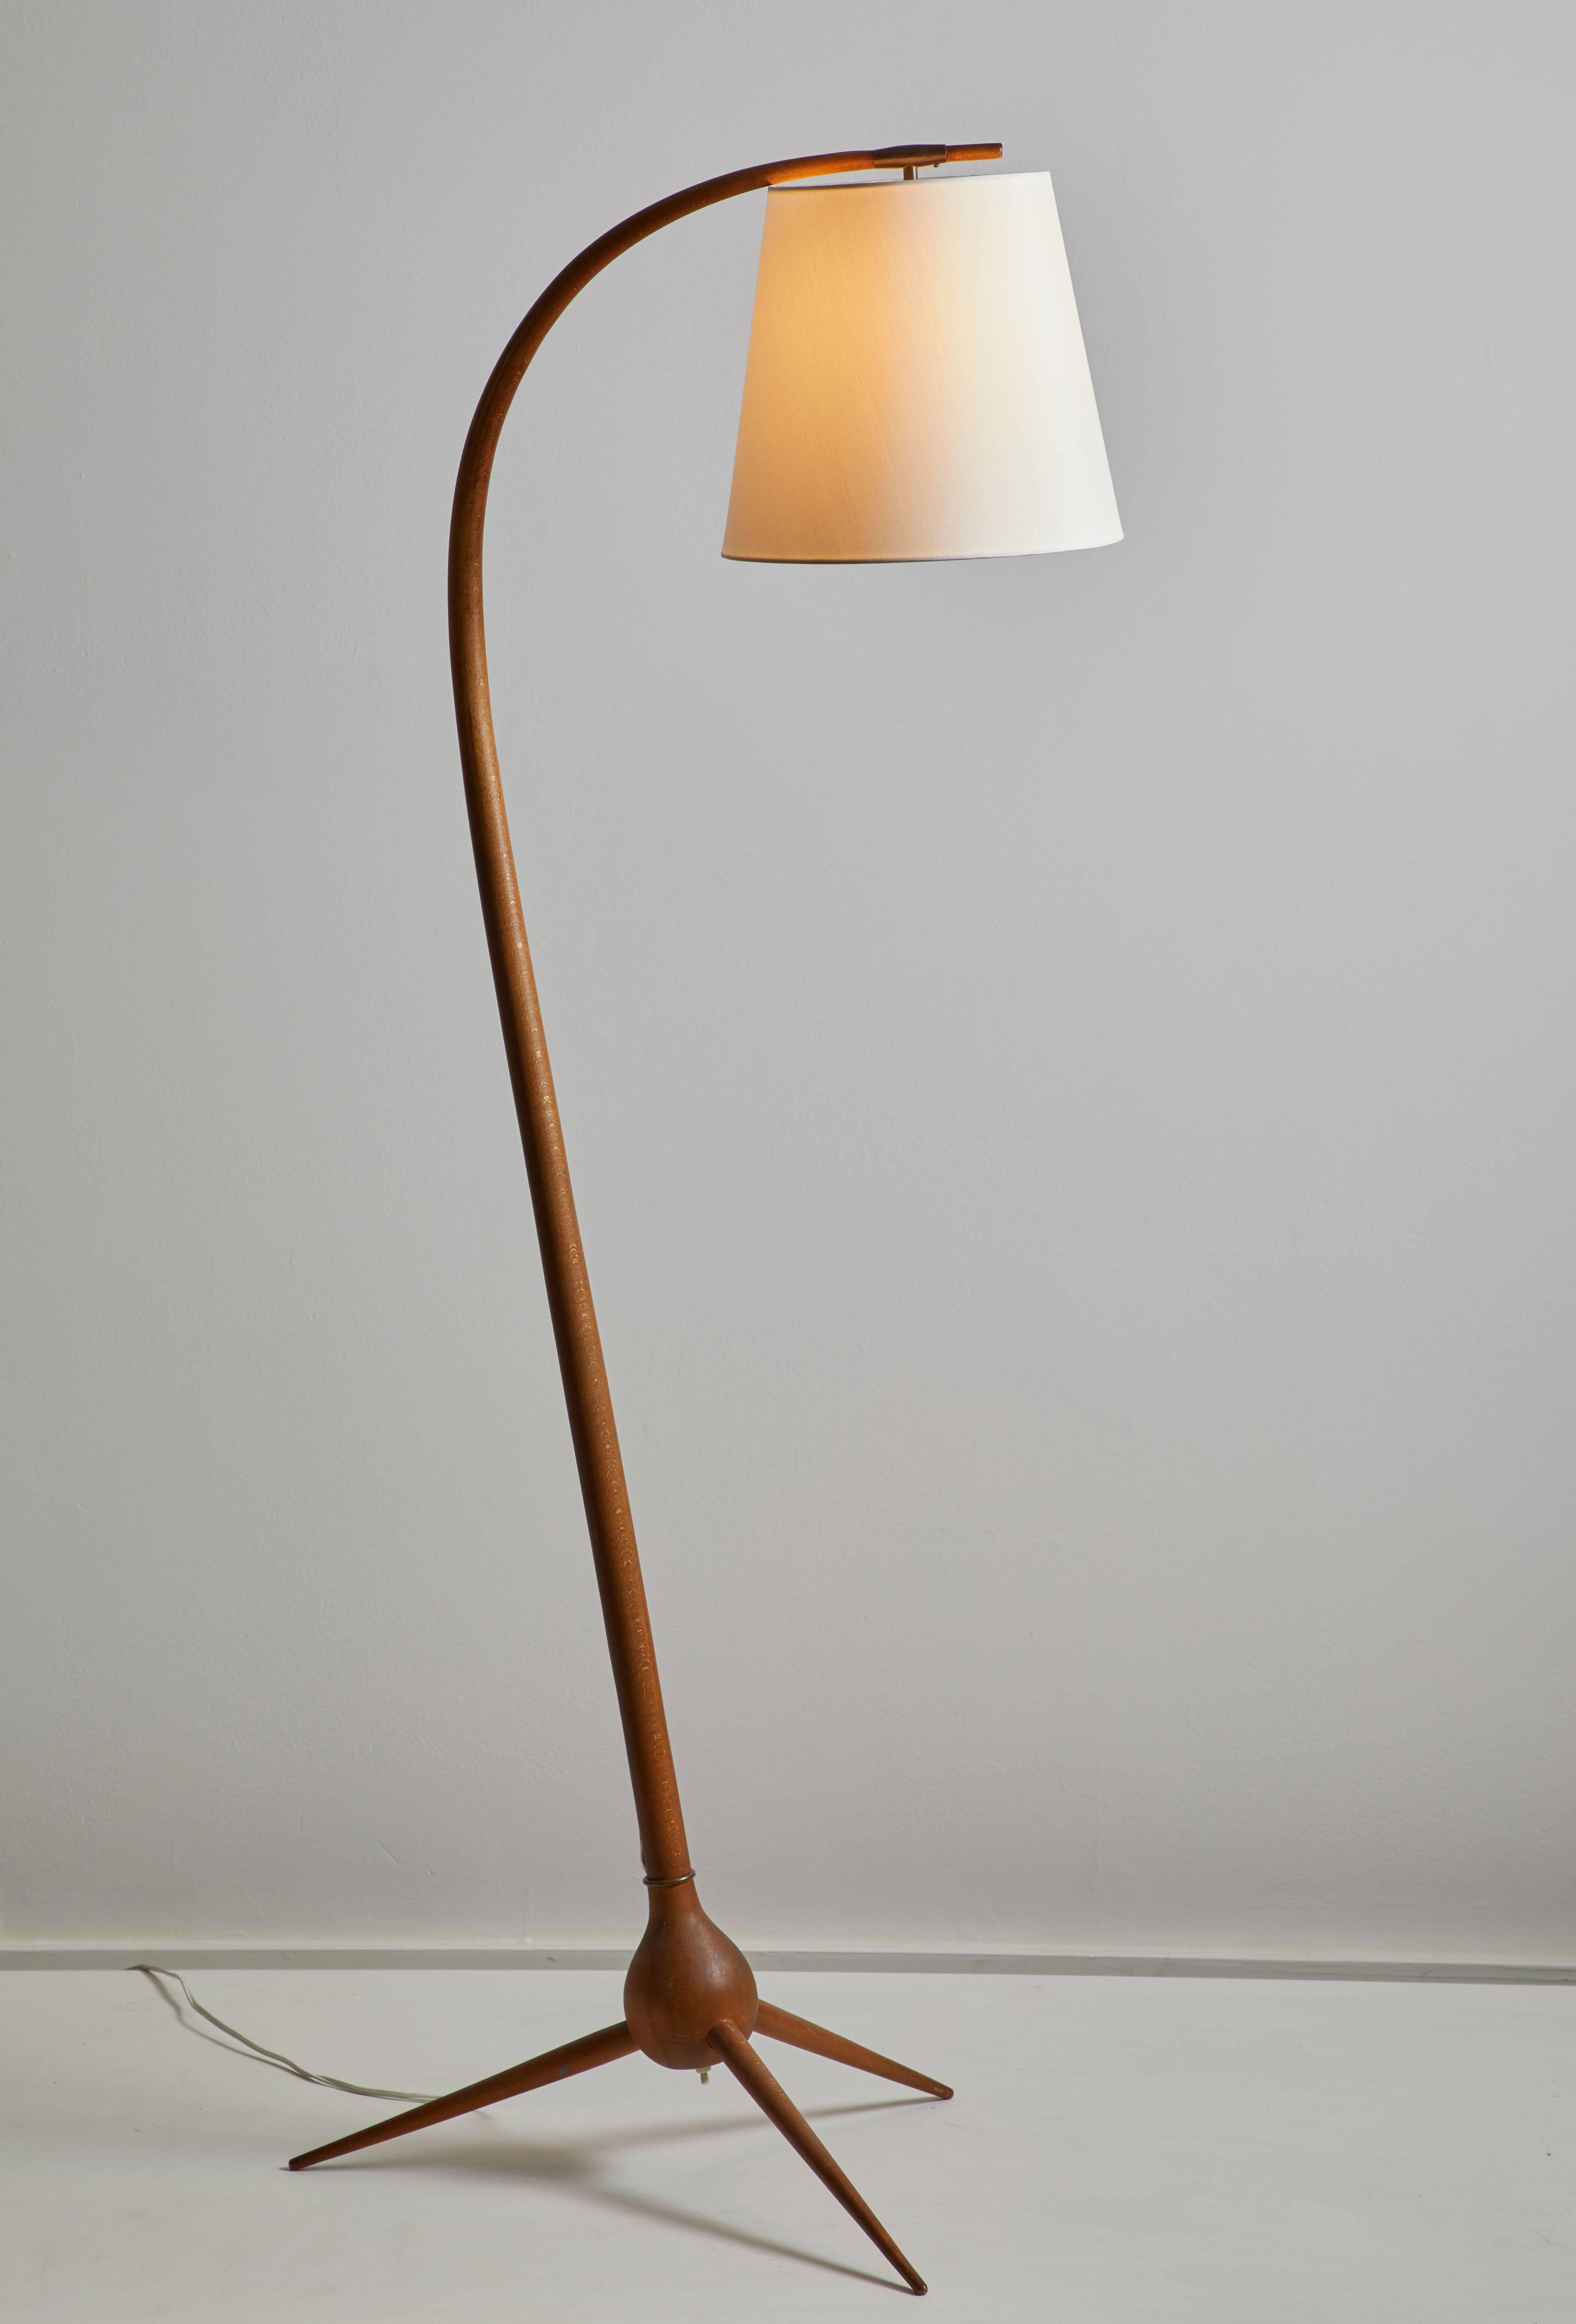 Bridge floor lamp by Severin Hansen Jr. Stained beech and brass. Curved stem on three-star foot base,  custom linen shade. Designed in Denmark, circa 1960s. Original cord. Takes an E27 100W maximum bulb.